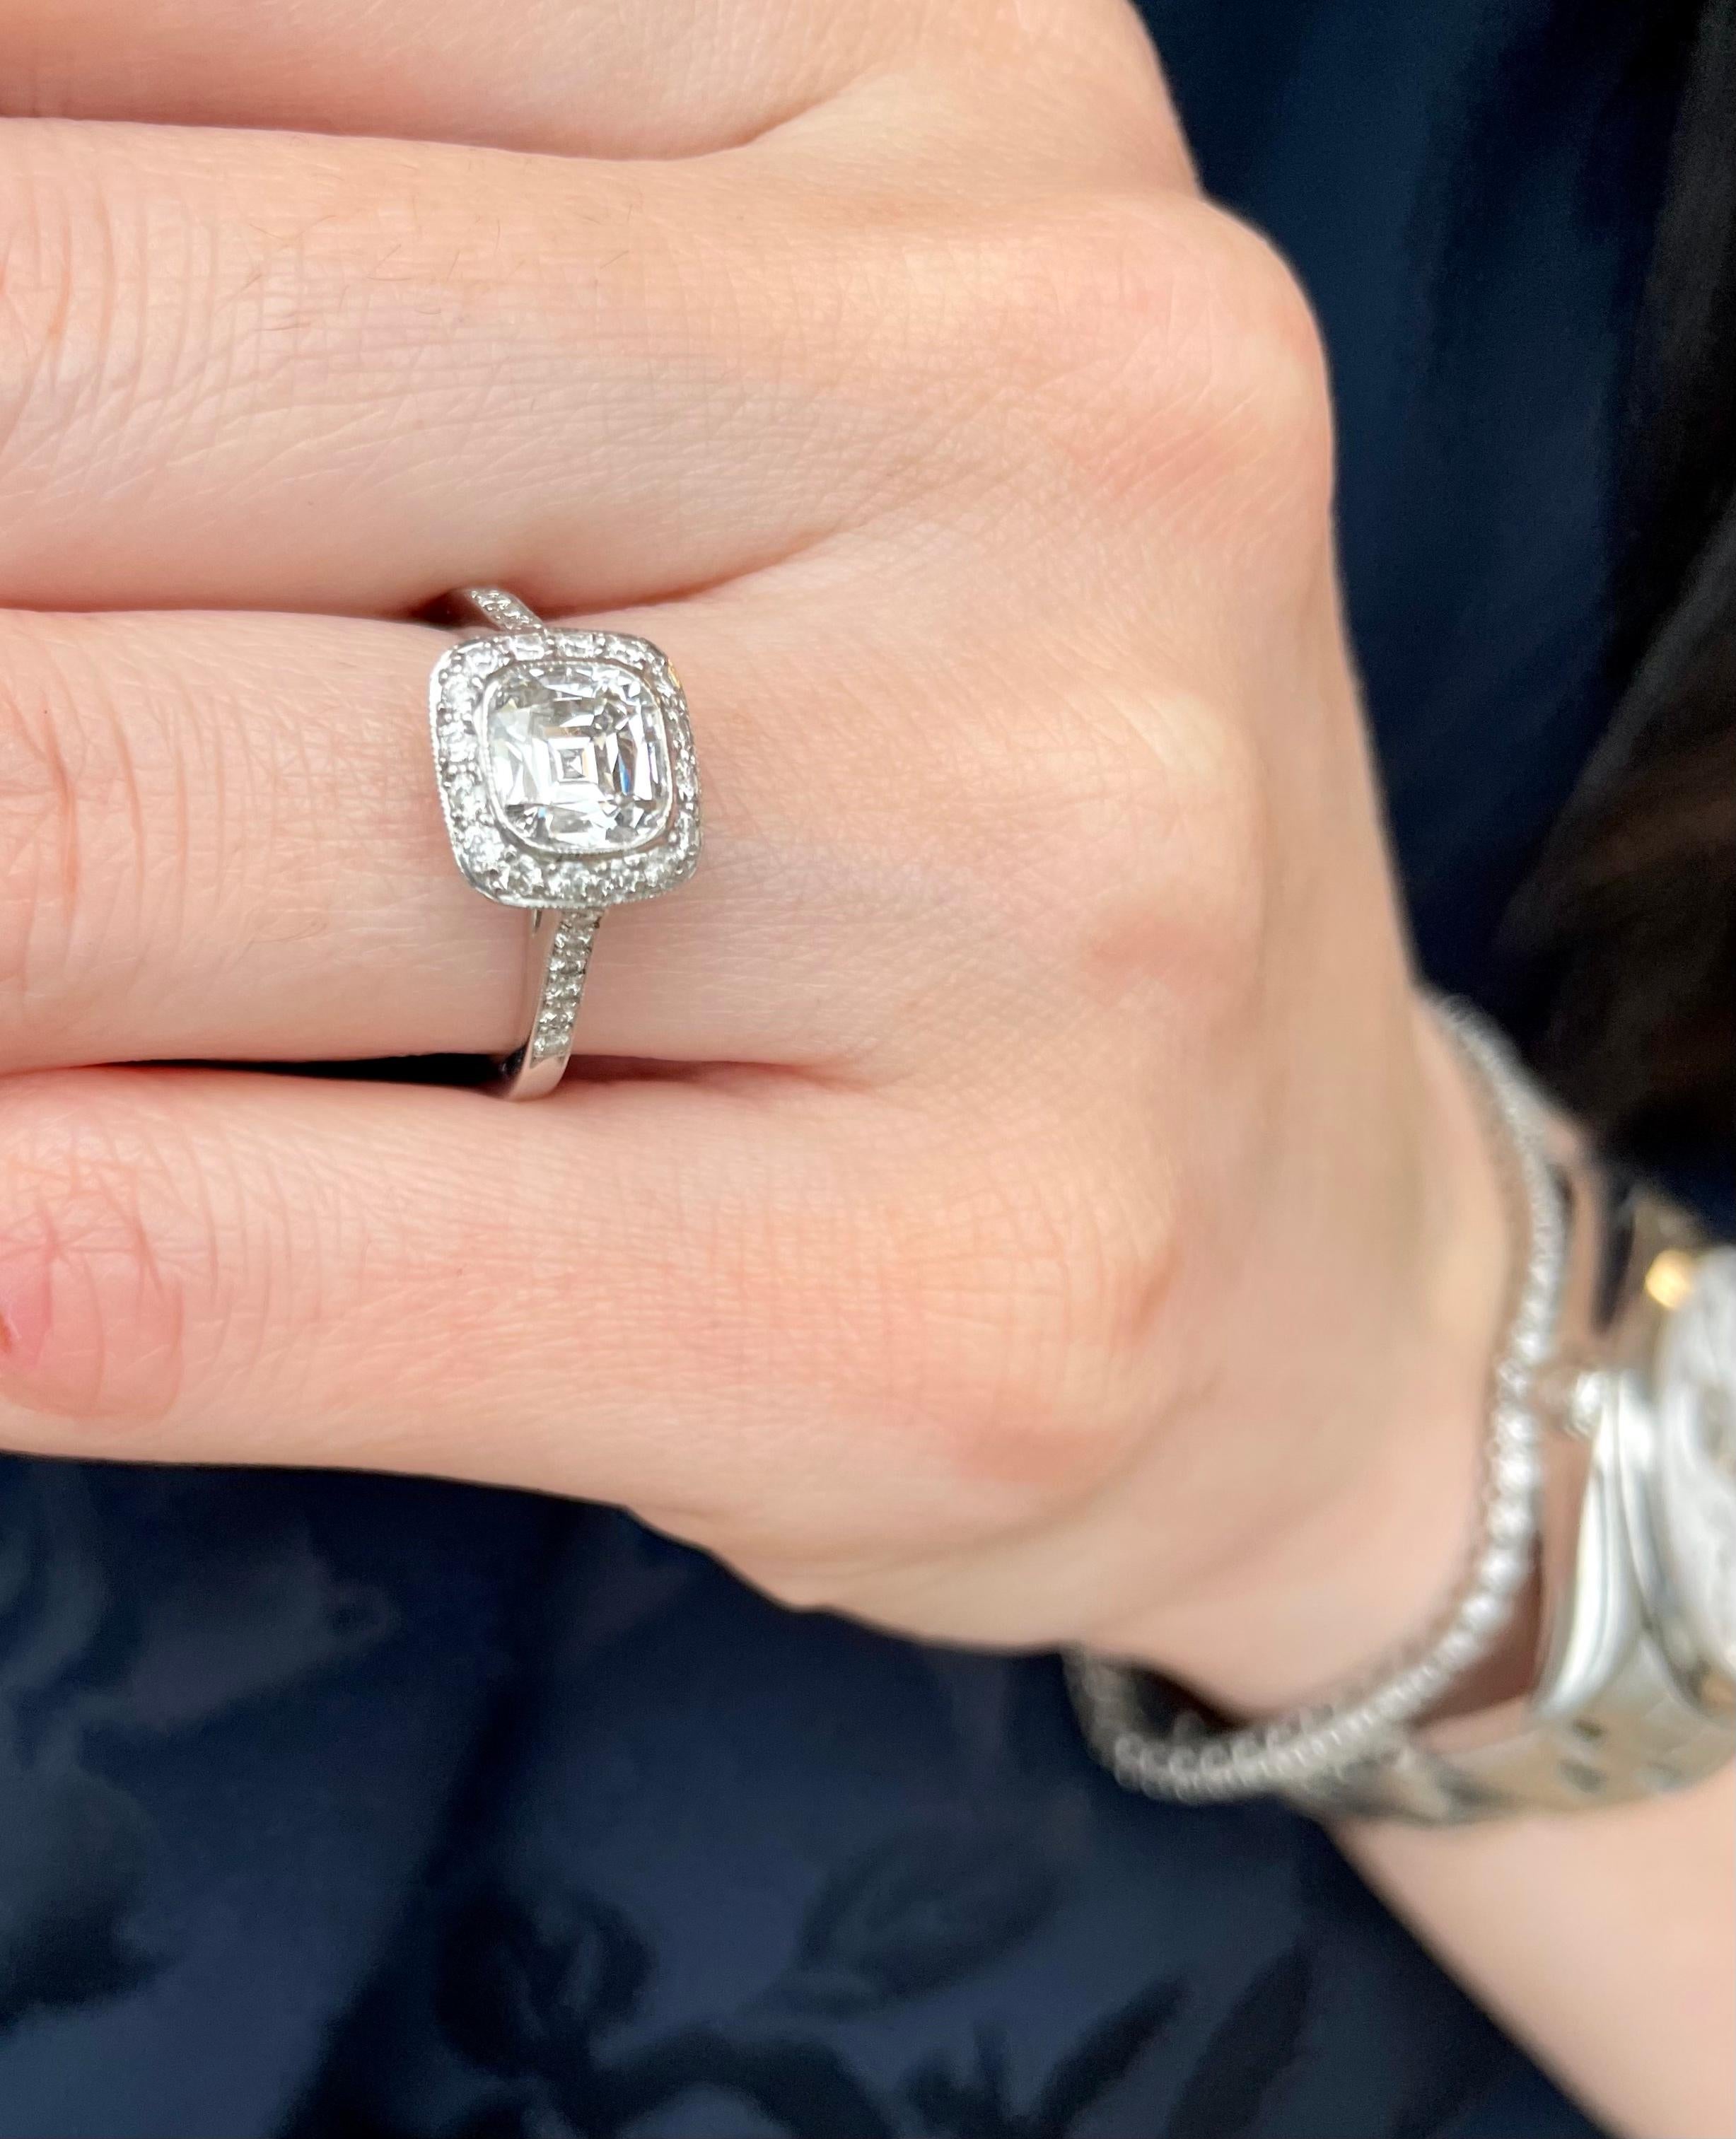 Tiffany & Co Legacy Diamond Engagement Ring Edwardian Style features a full circle of bead-set diamonds that elegantly showcase the center stone cut to maximize brilliance. Stamped Tiffany & Co. Platinum Engraved D467.833 el al 23975556 PT950 With